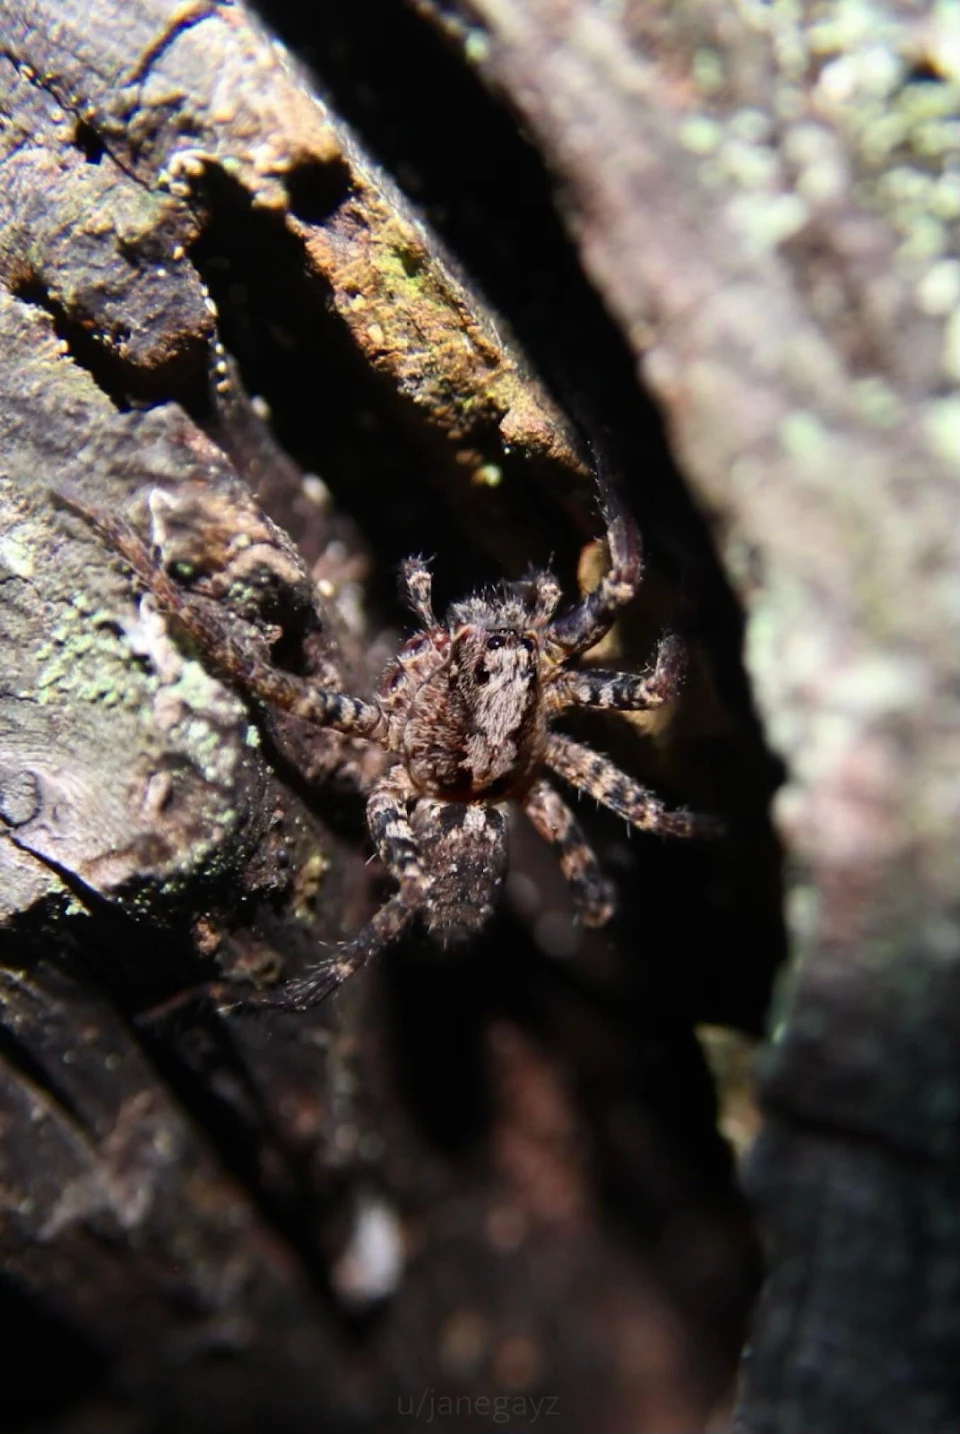 Took this pic of a spider that was inside our peach tree. Size was around fingertip scale